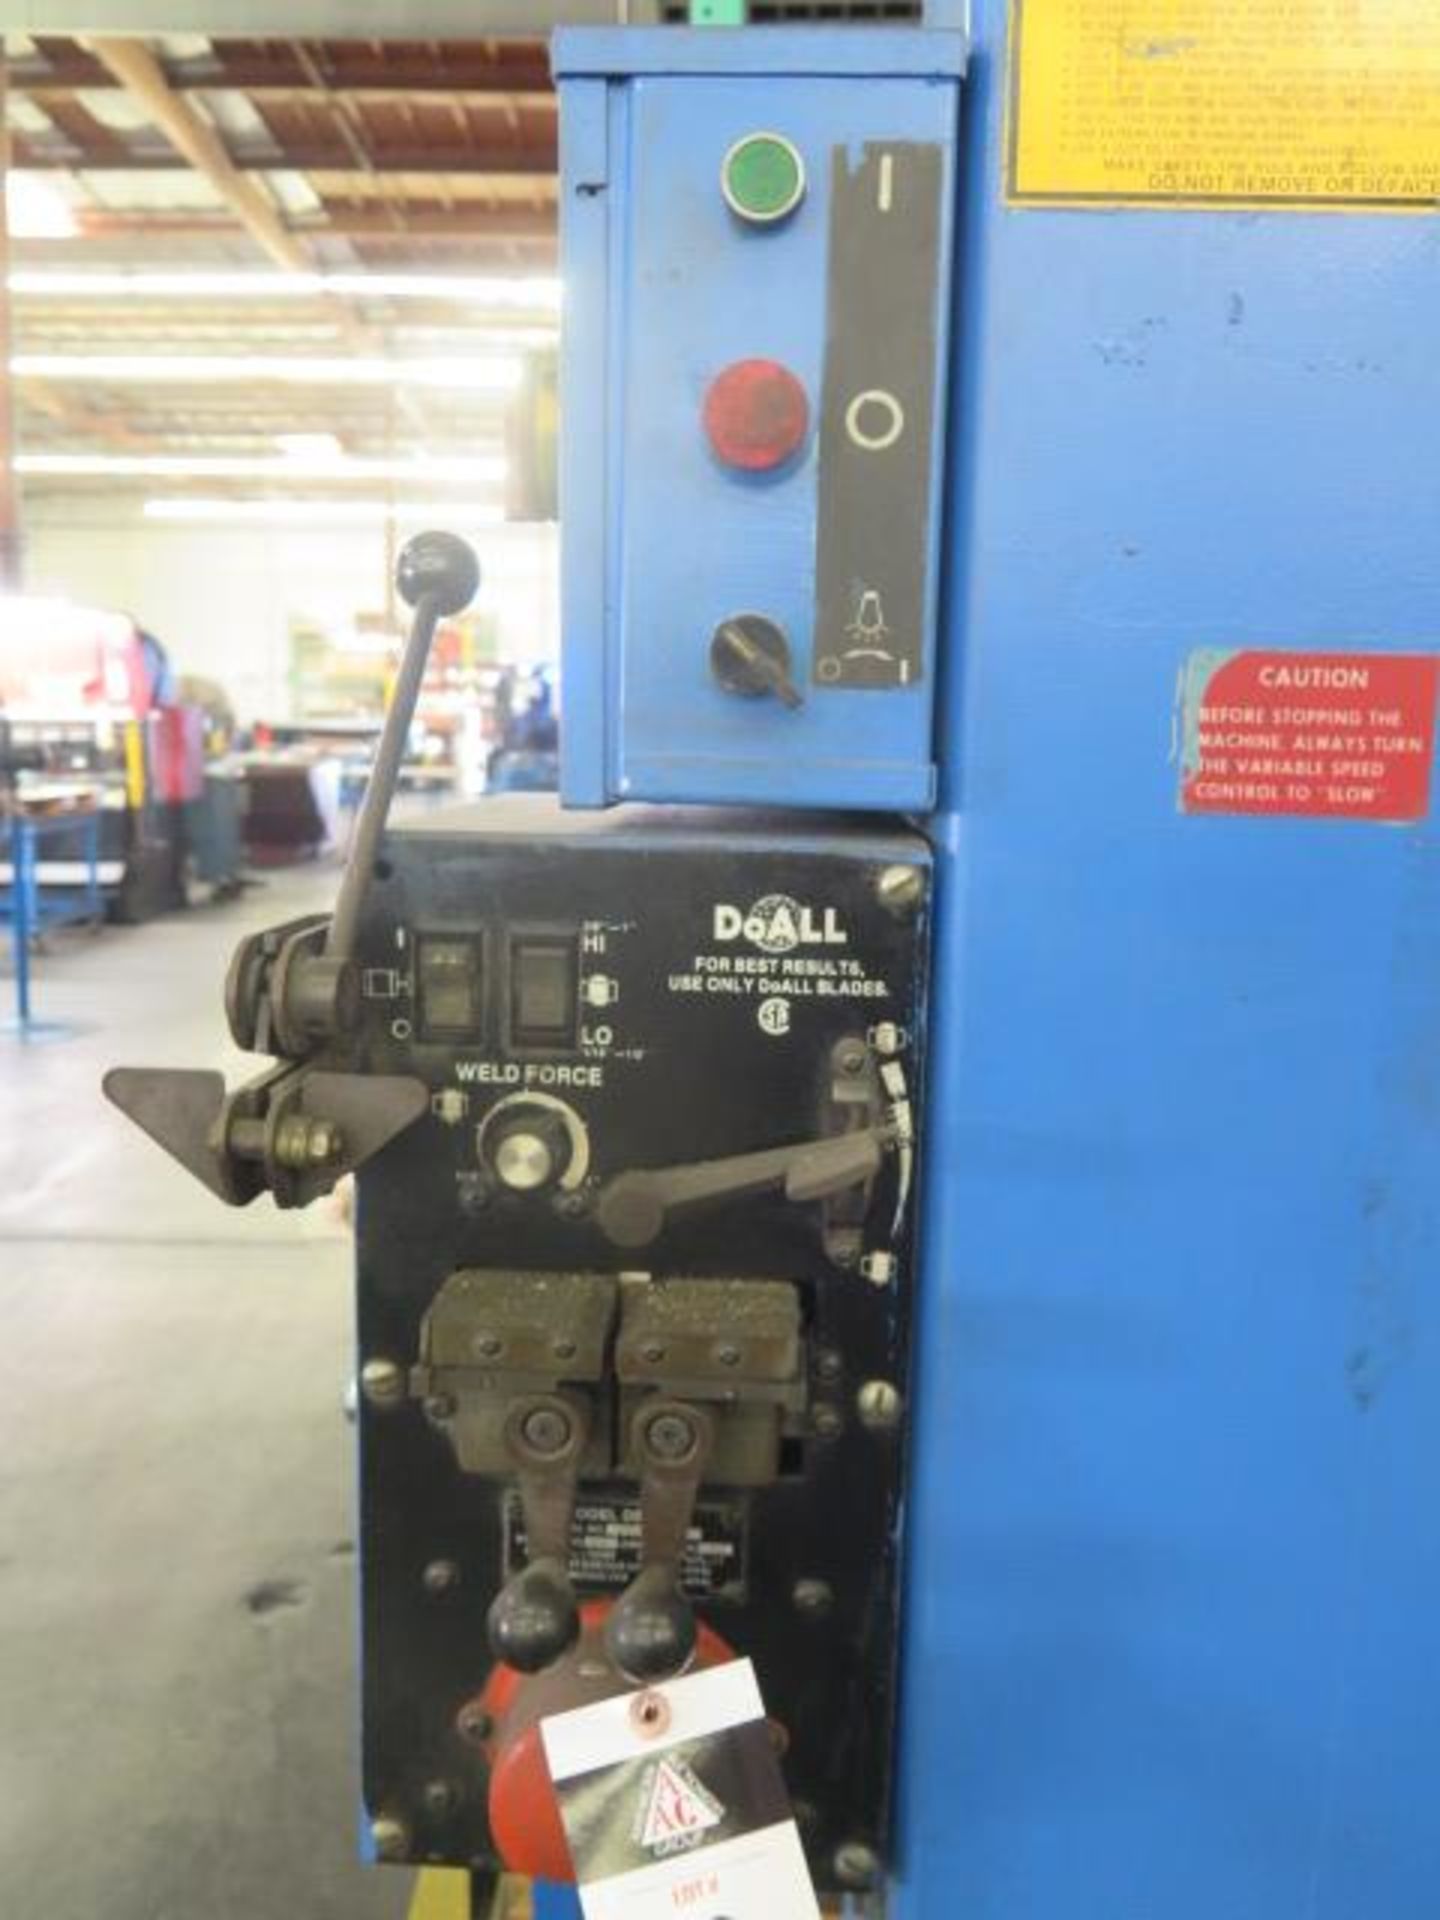 DoAll 2013-V 20" Vertical Band Saw s/n 499-92118 w/ Blade Welder (SOLD AS-IS - NO WARRANTY) - Image 5 of 7